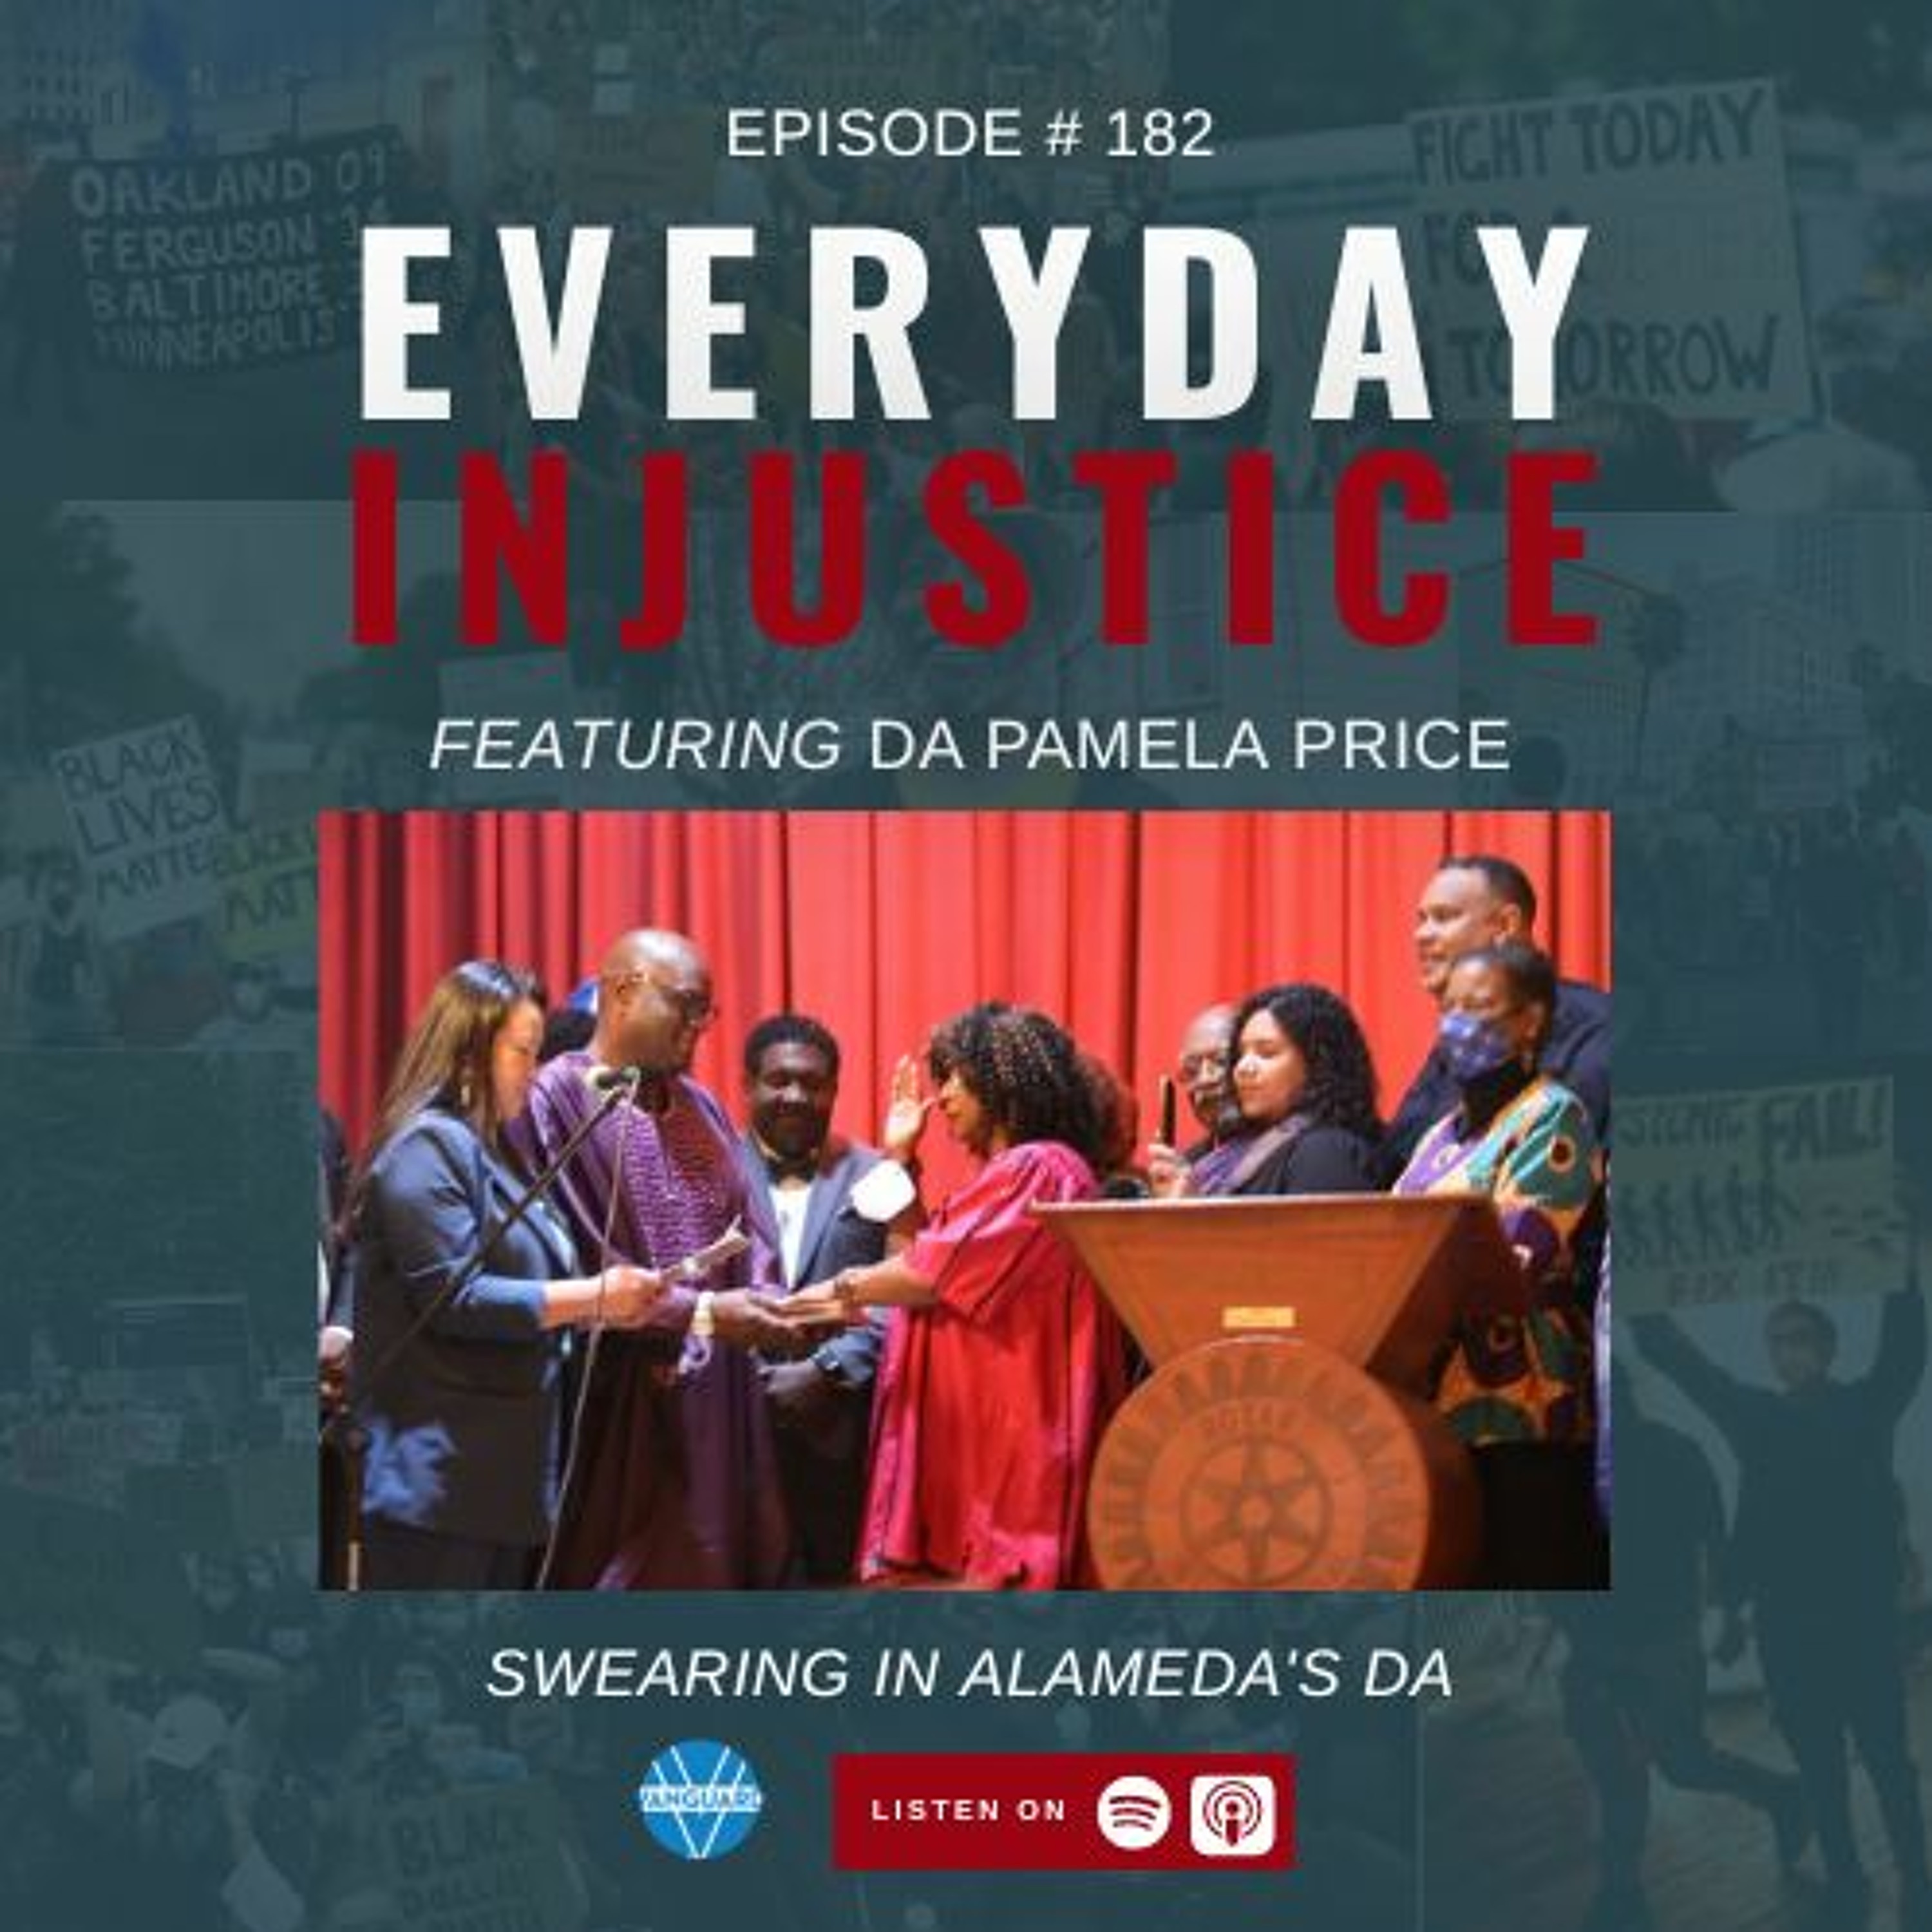 Everyday Injustice Special Episode: Pamela Price Historic Swearing In